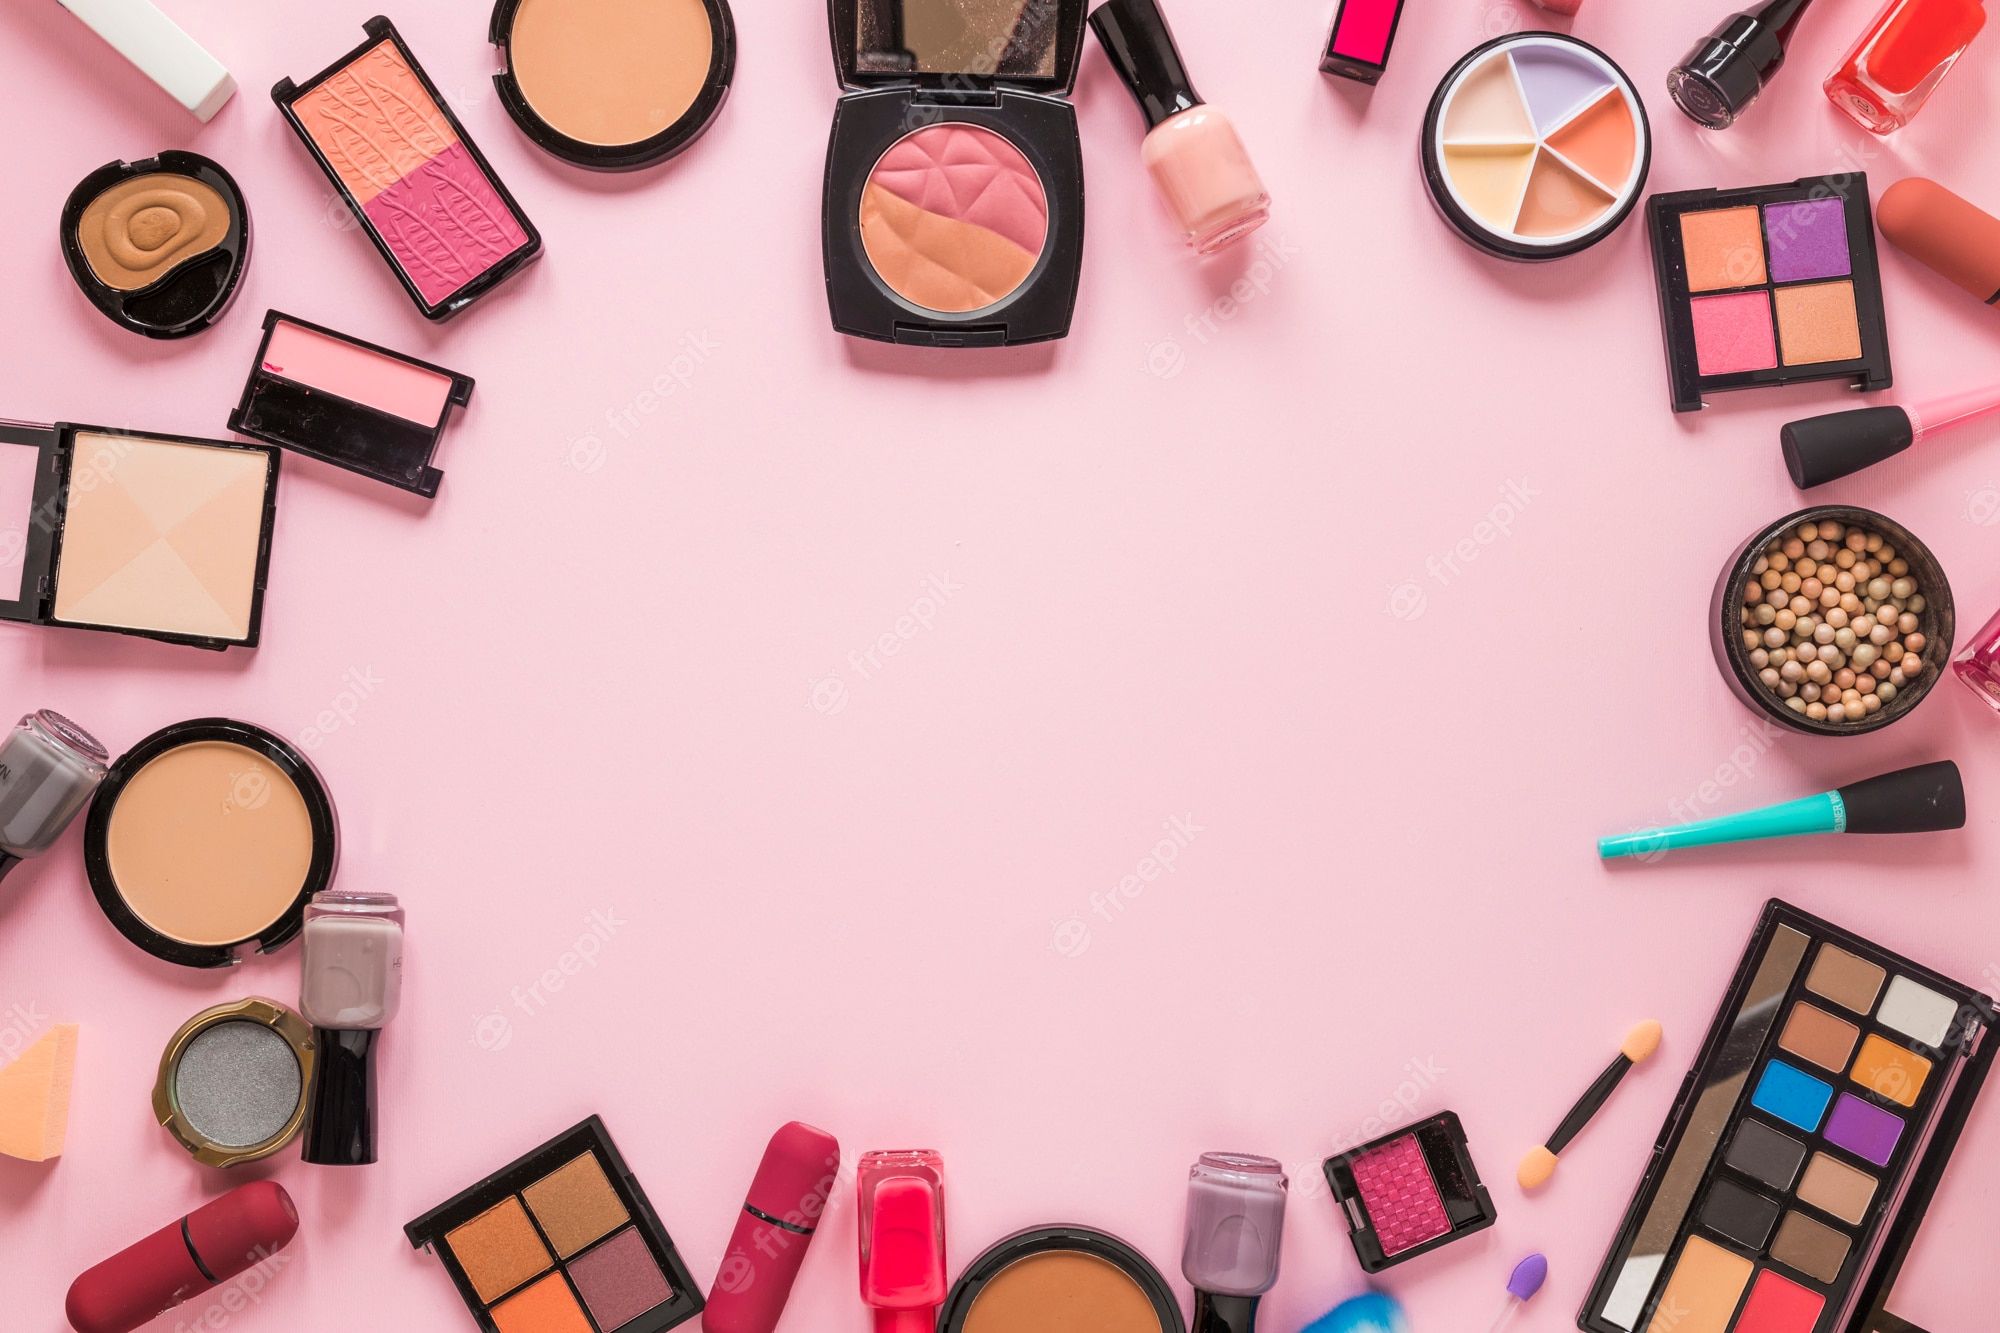 A variety of makeup products arranged in a circle on a pink background - Makeup